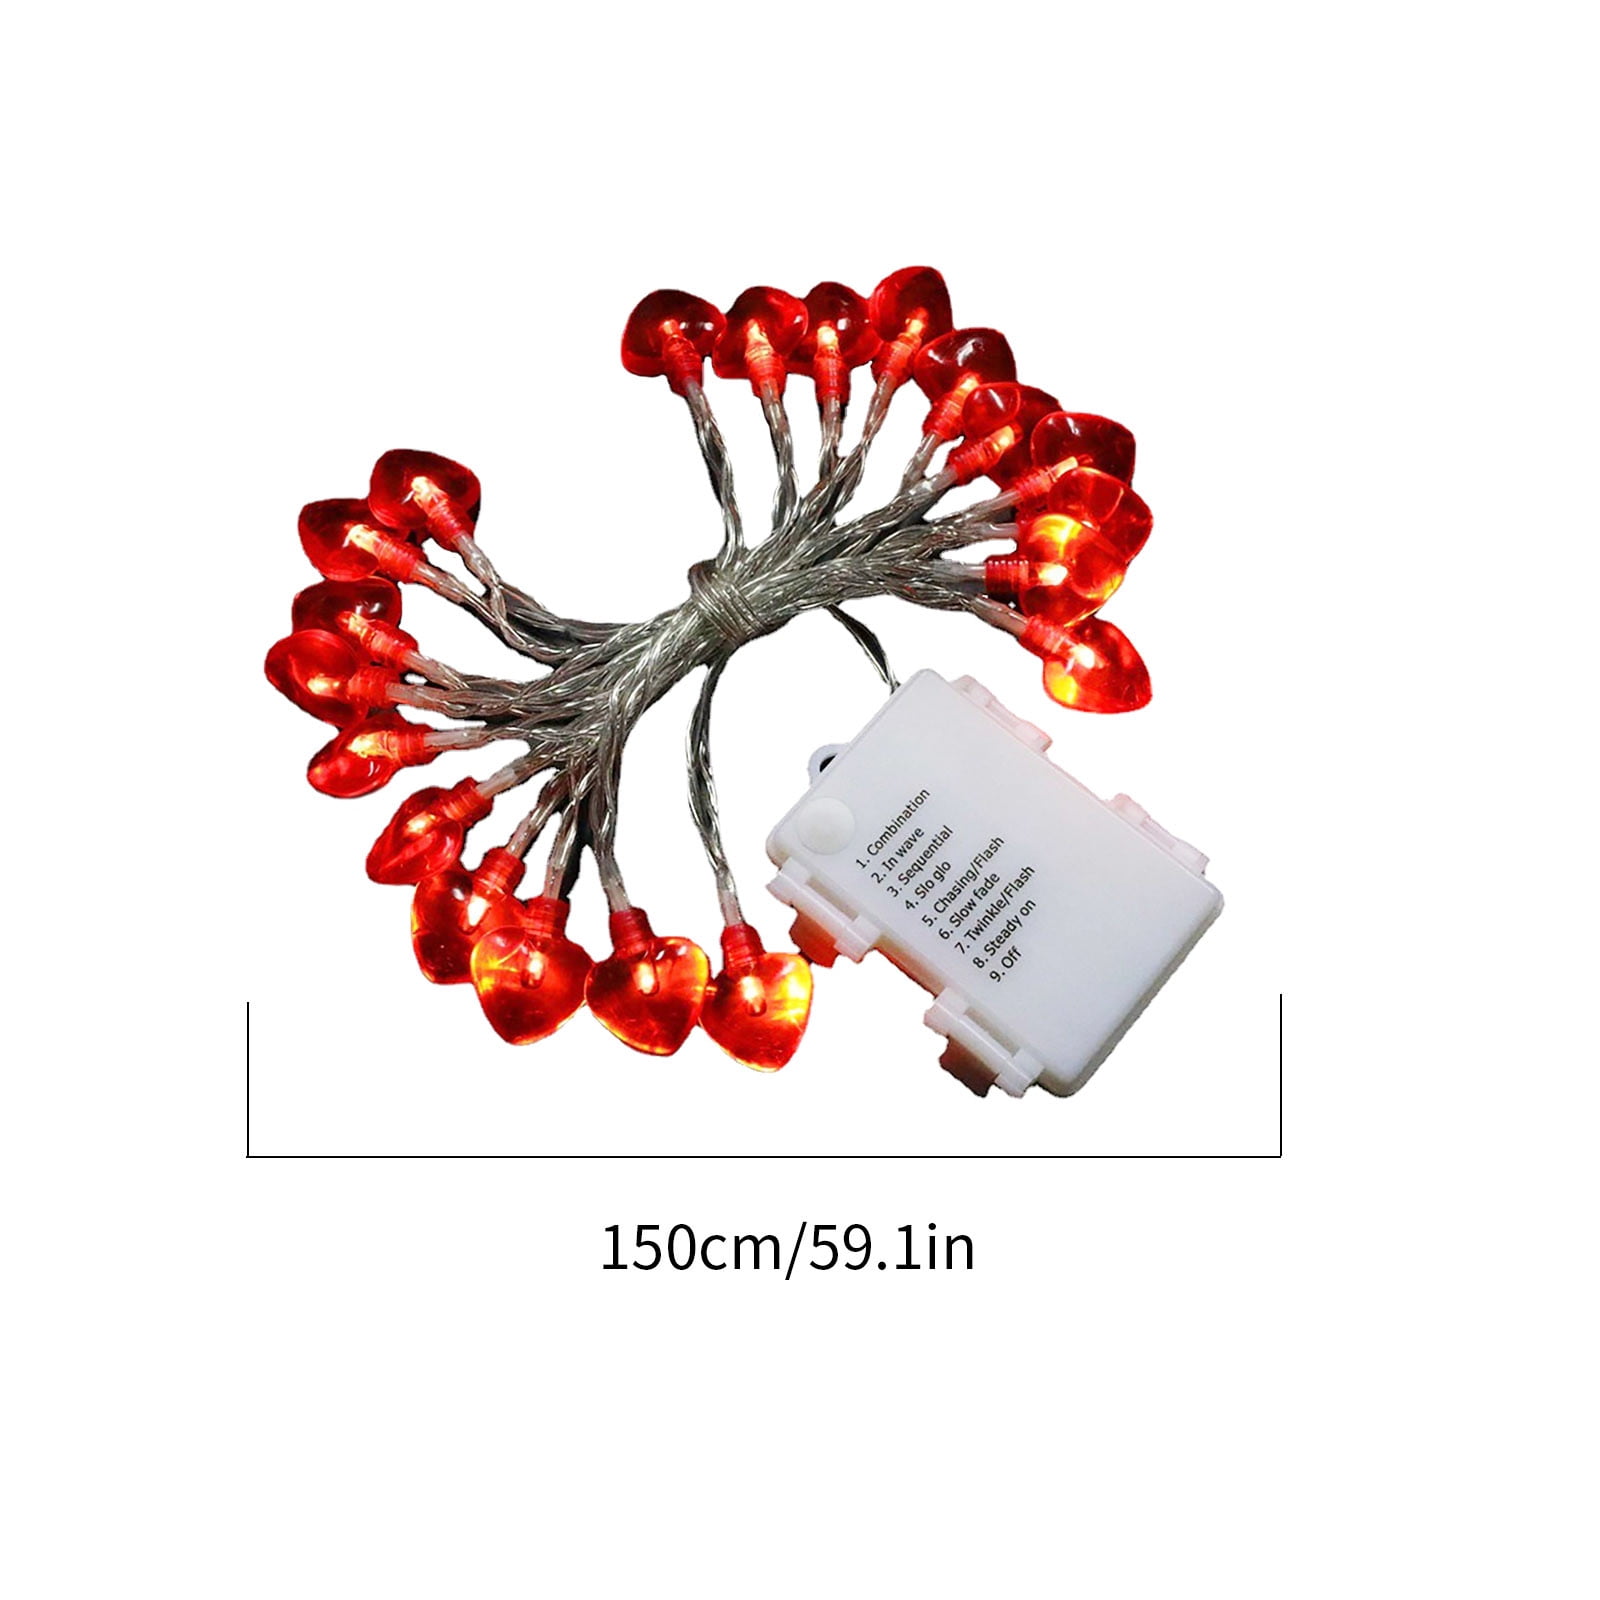 Qepwscx Lights String With Remote Outdoor String Light Red Love 